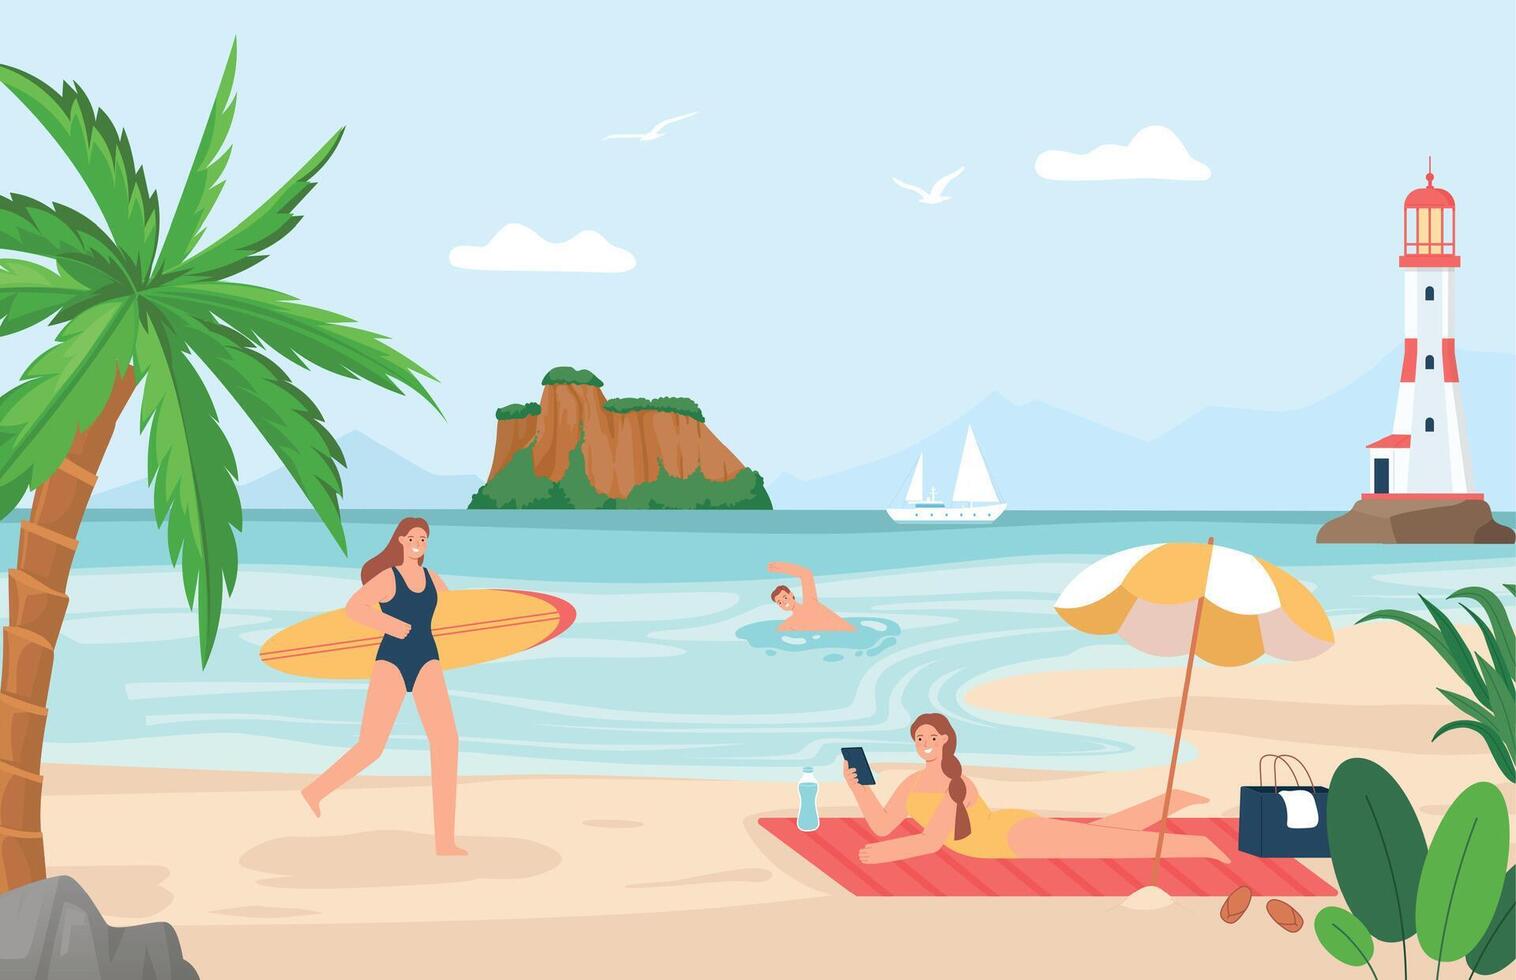 People at beach. Female and male characters on vacation having different activities. Woman sunbathing, man swimming vector